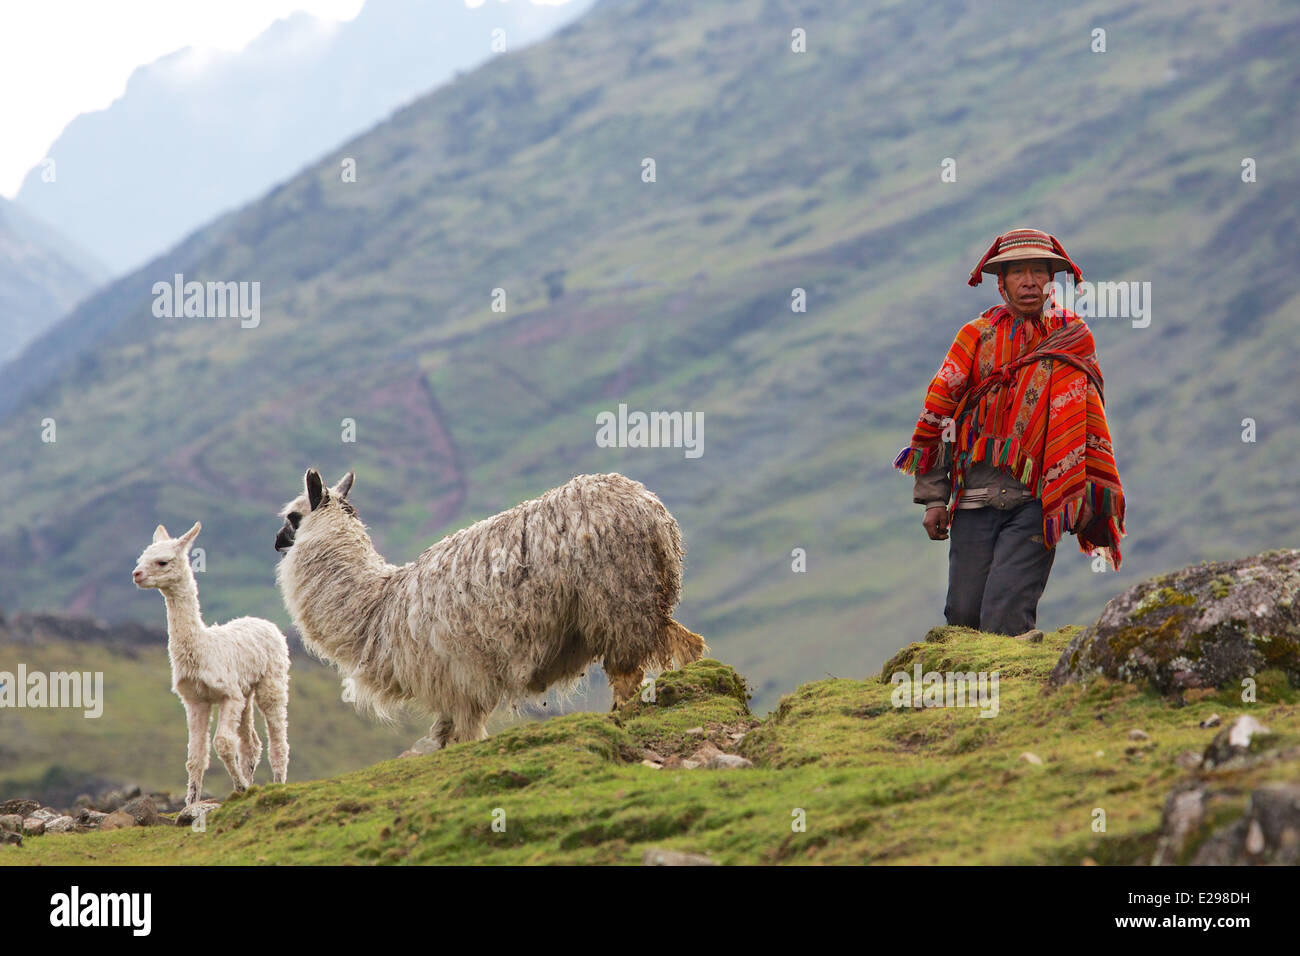 An indigenous Quechua man with his alpacas in the Lares Valley high in the Andes in Peru Stock Photo